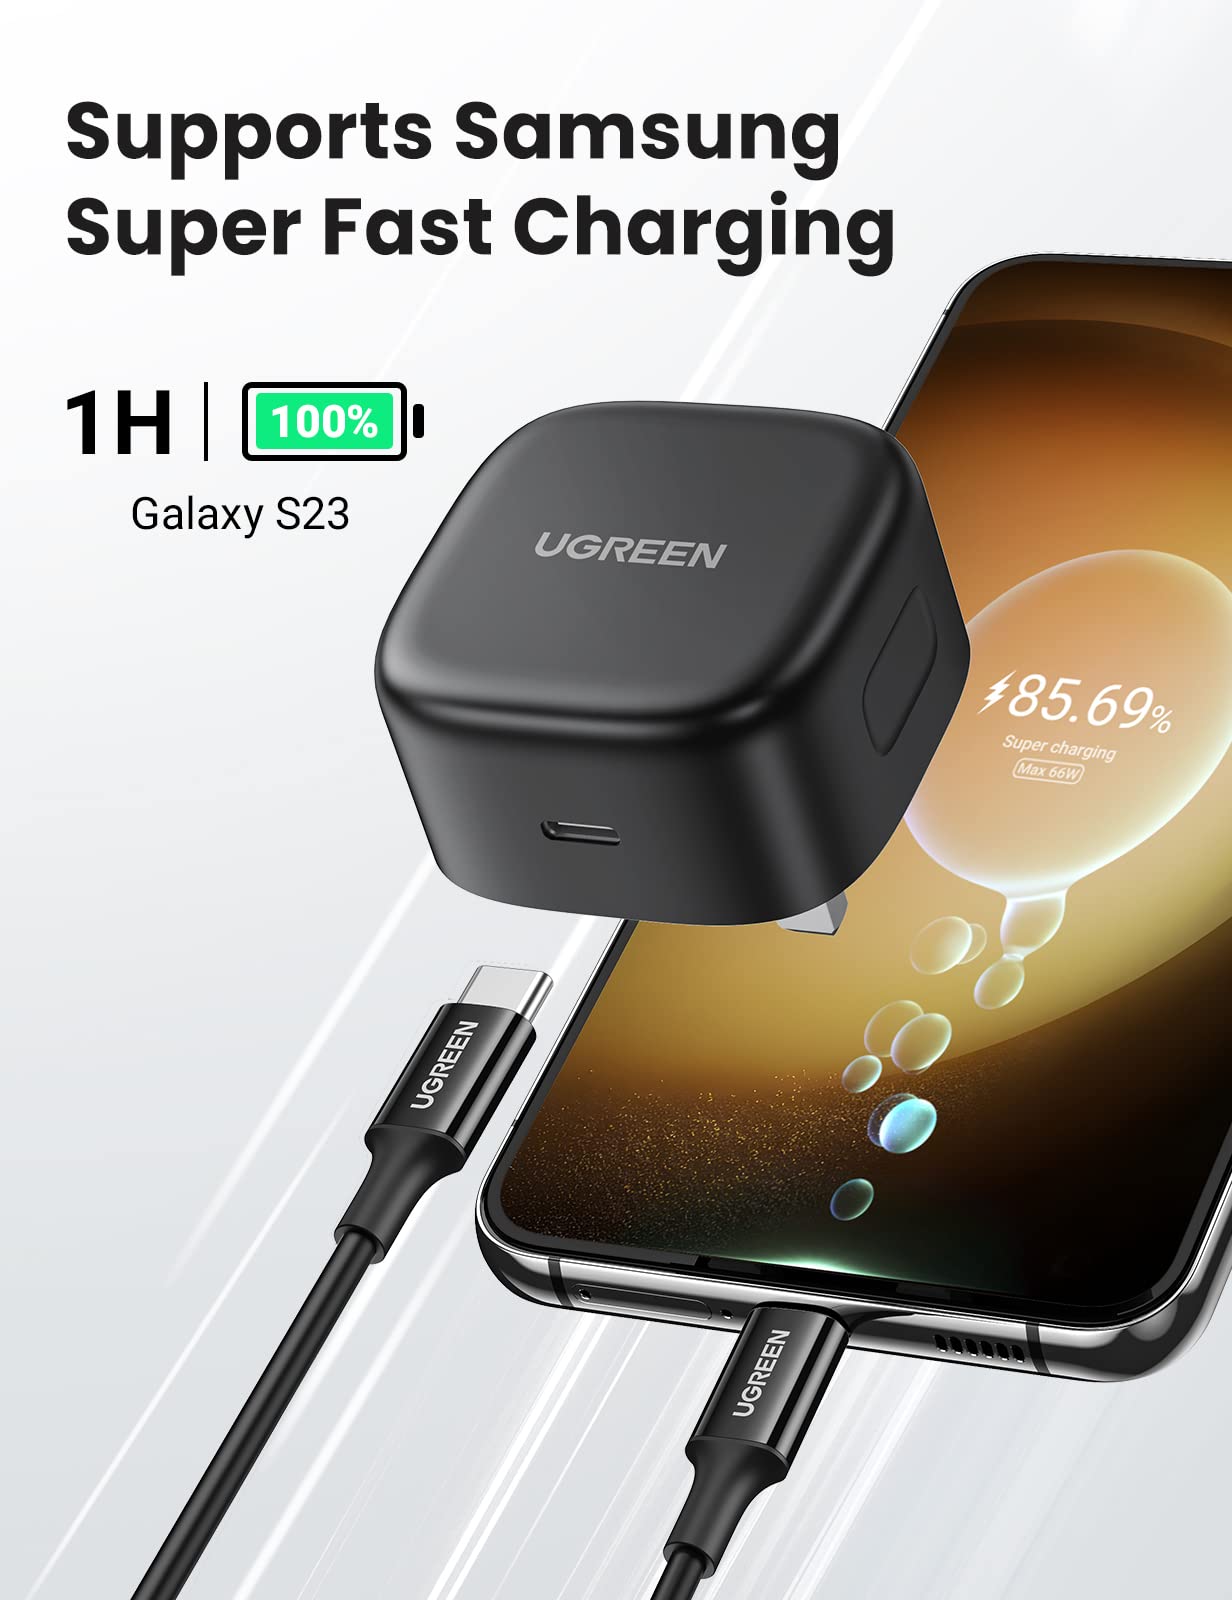 UGREEN 25W USB C Charger Super Fast PD Charger Plug with 2M USB C